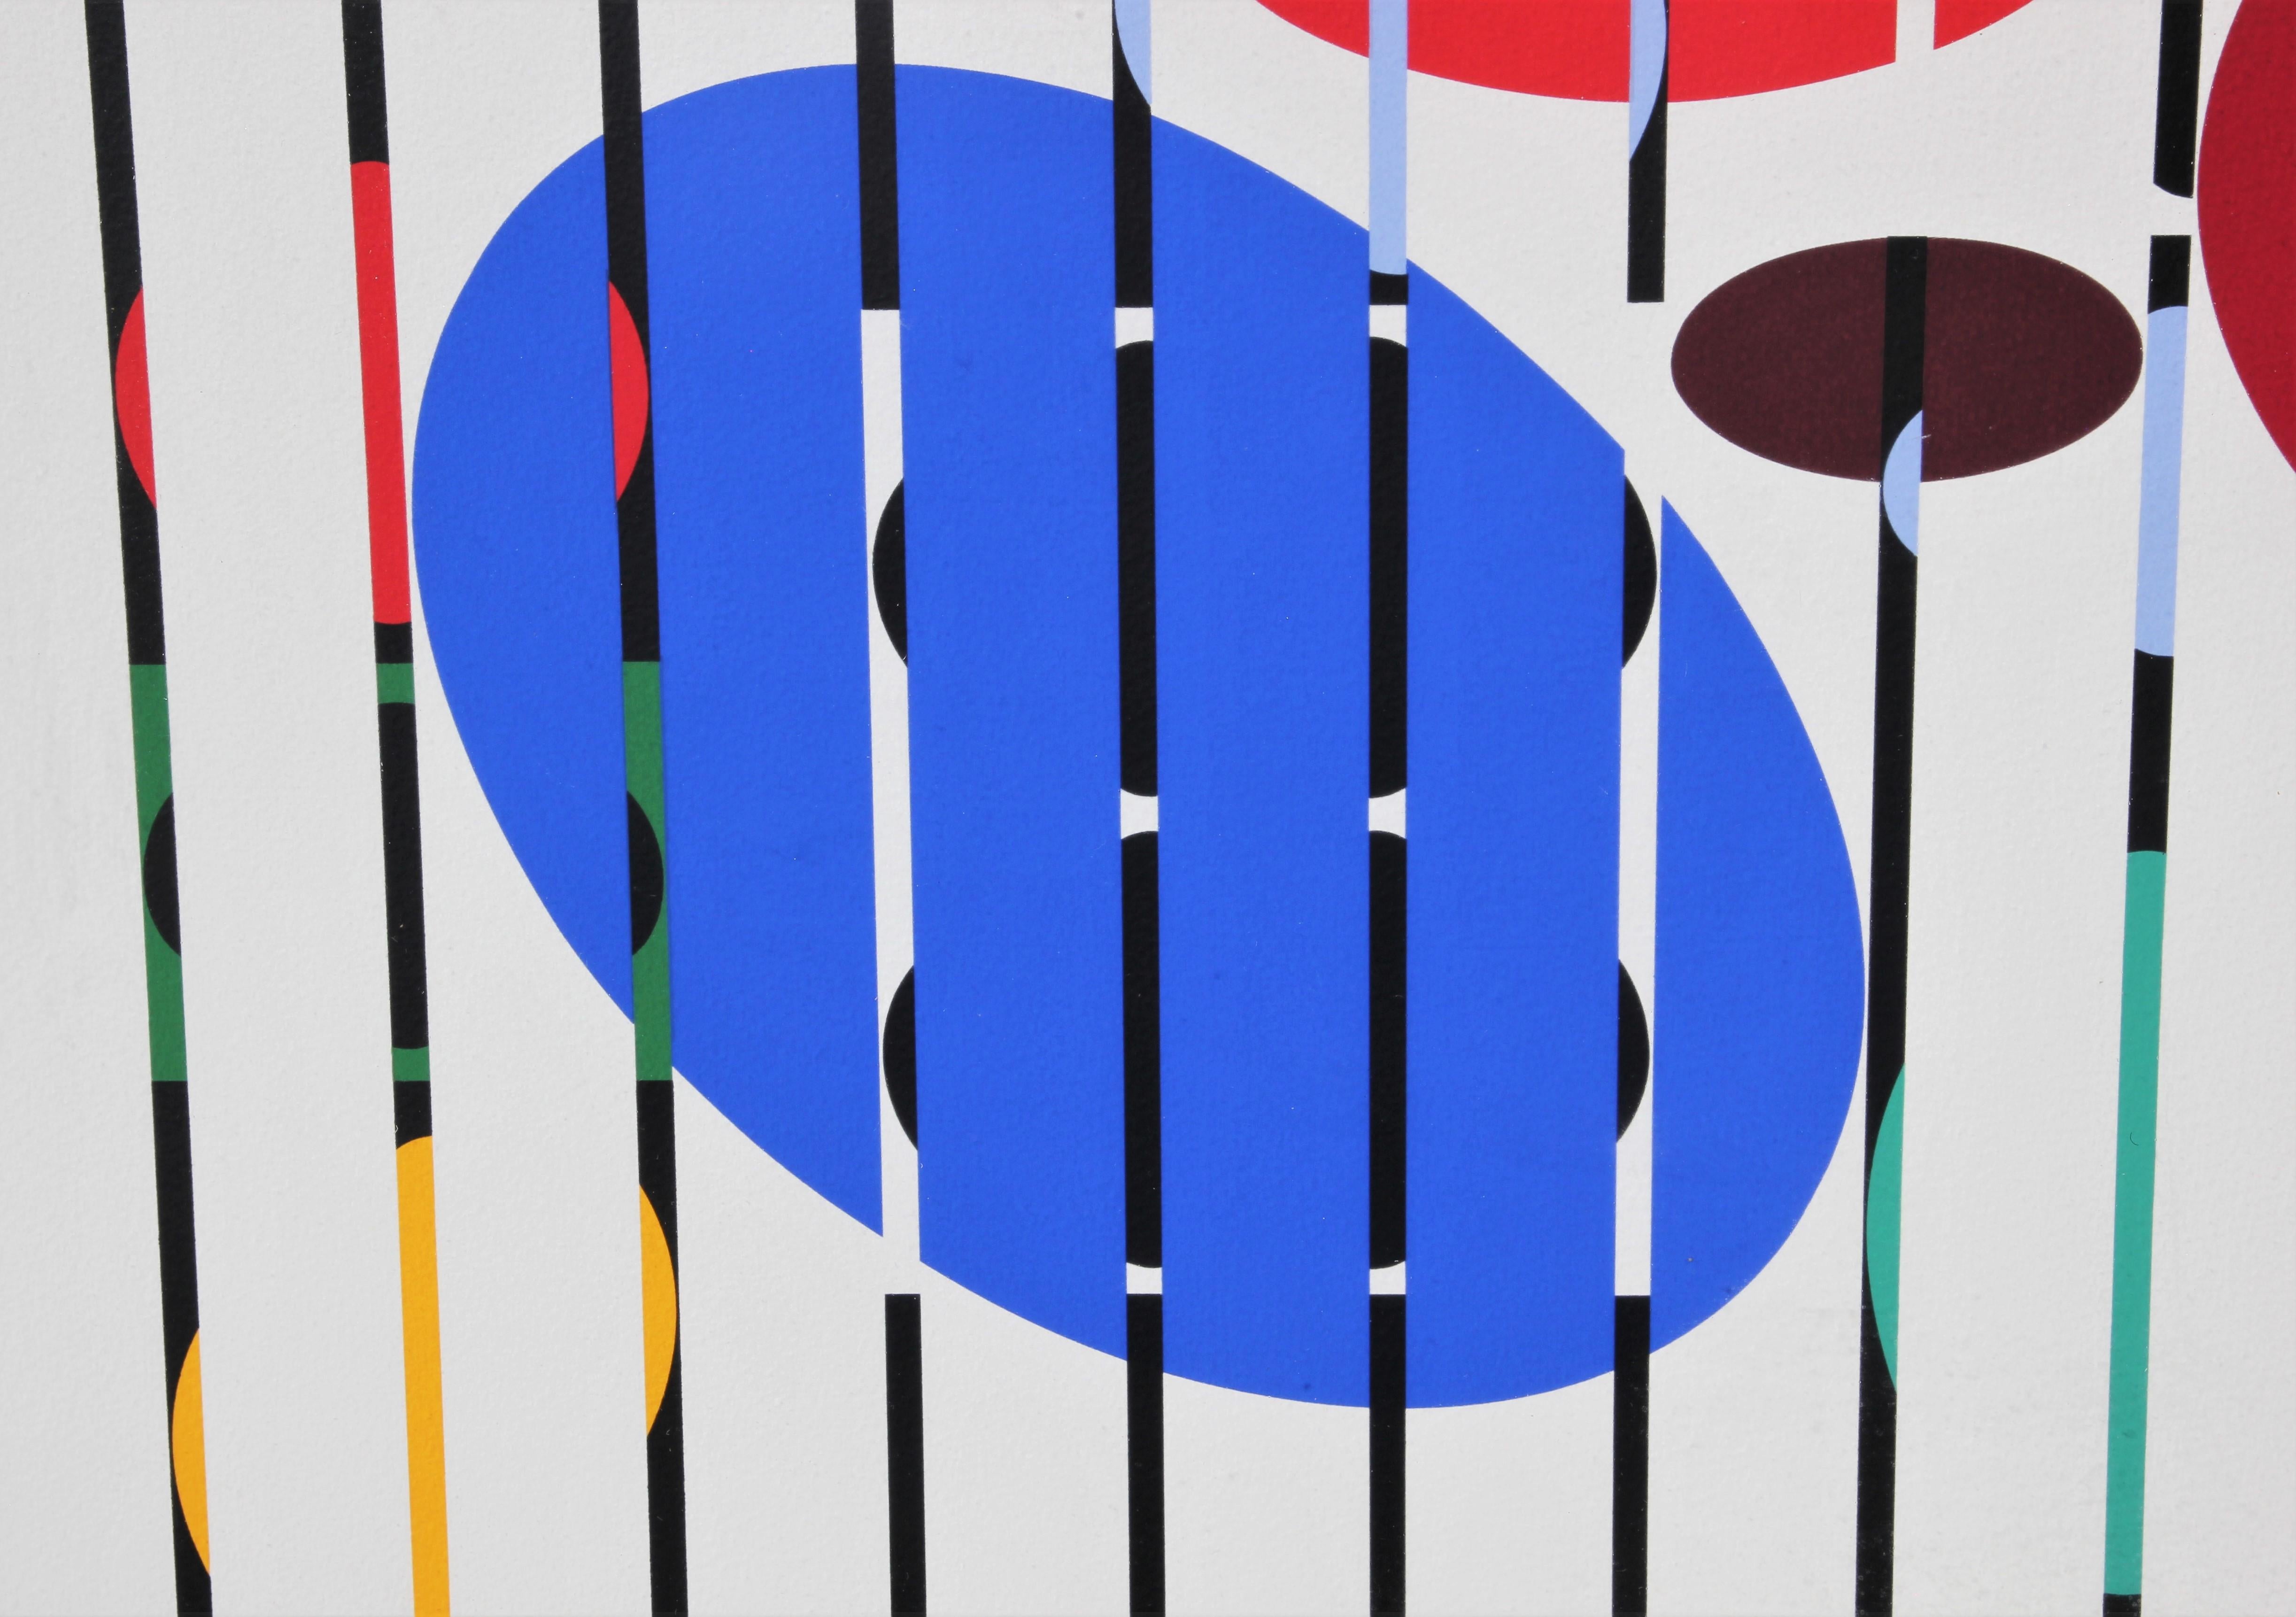 Large abstract geometric op art lithograph by Israeli sculptor and experimental artist Yaacov Agam. Brightly colored lithograph featuring red, orange, blue, and brown circular shapes against a white background appearing to be over a cluster of